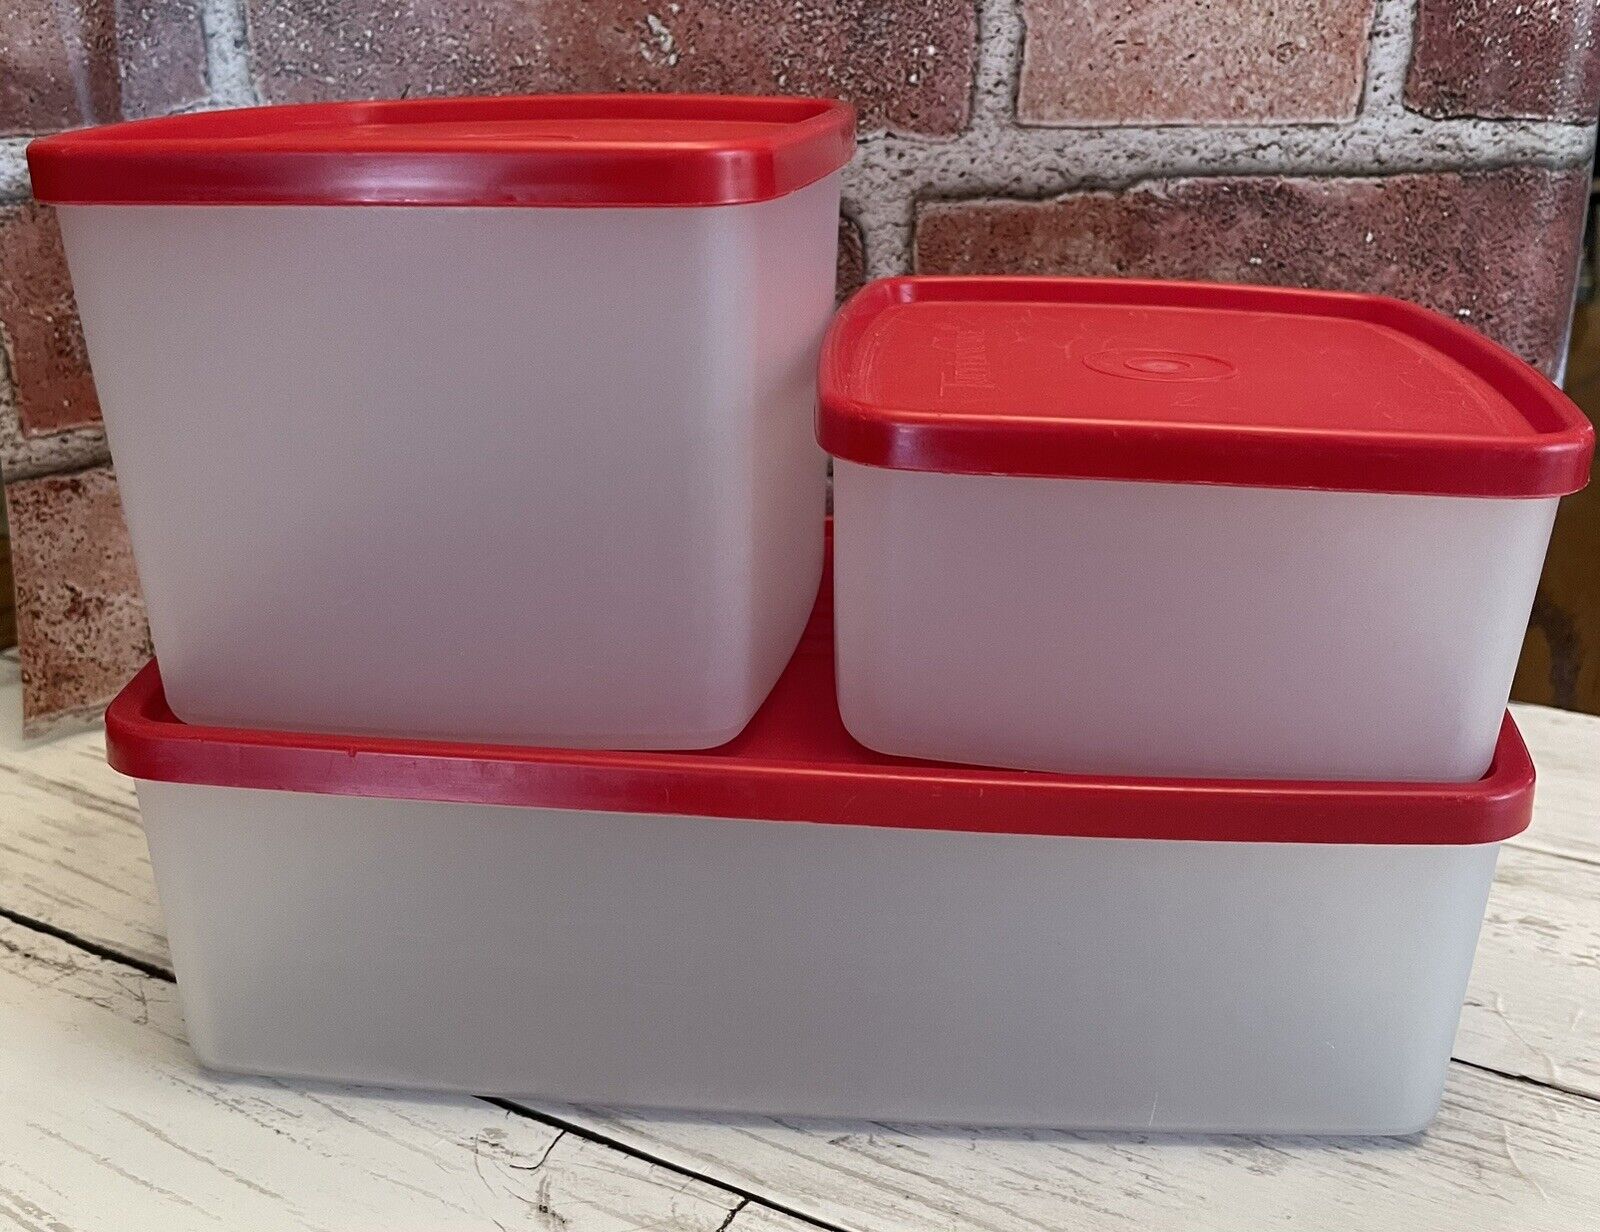 Lot of 3 Vintage Tupperware Modular Mates Storage Containers with Lids, EUC